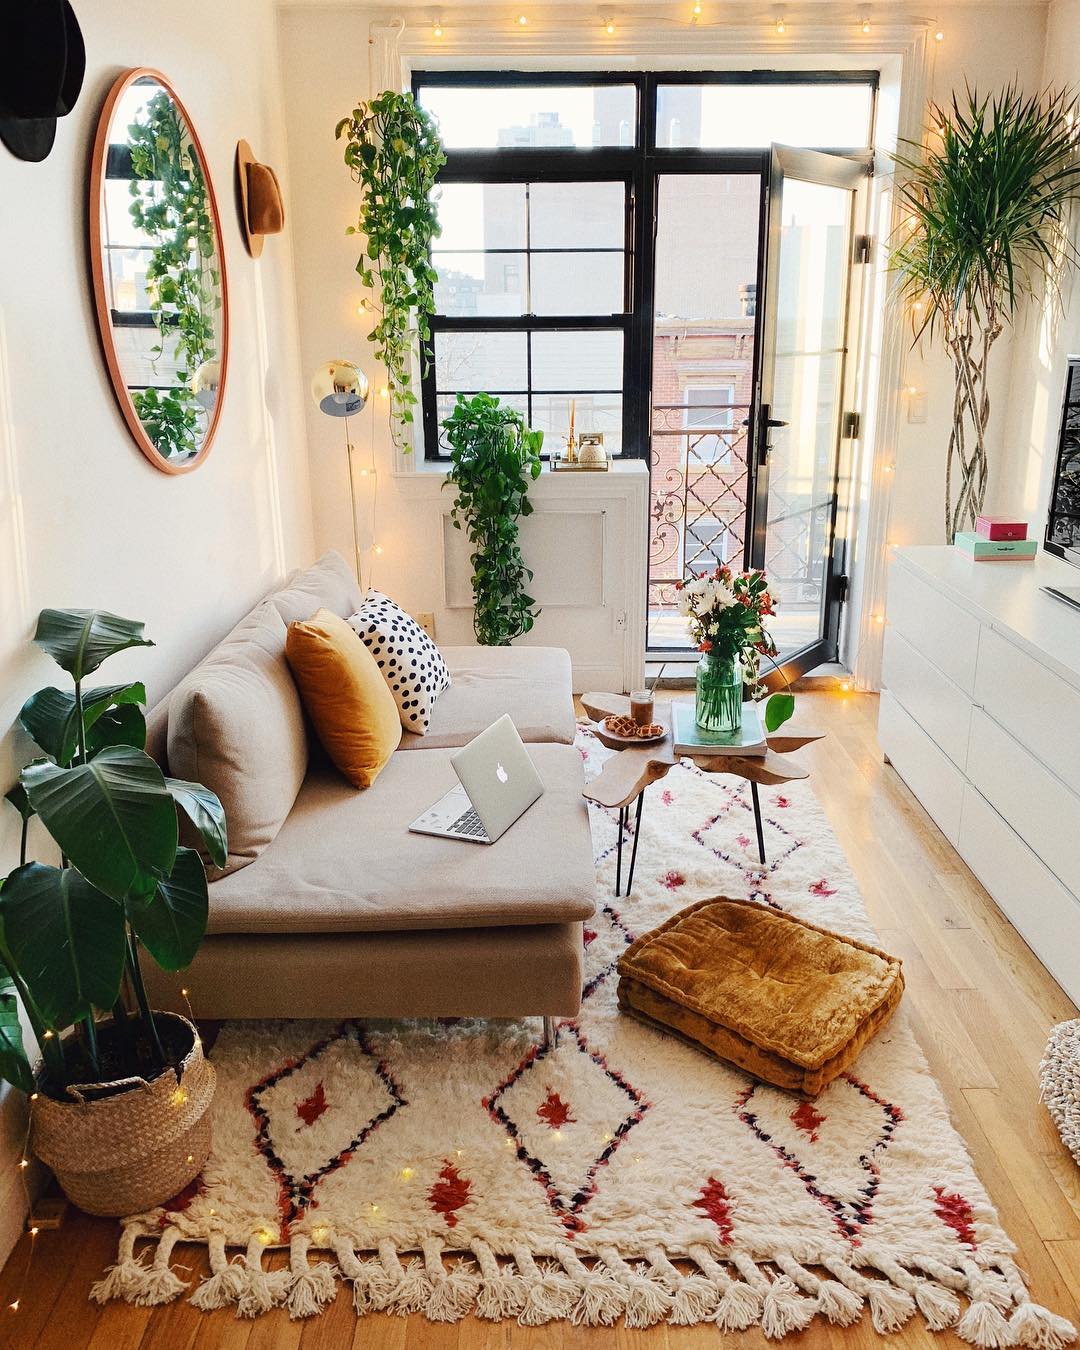 Small apartment living room with plants hanging from ceiling and white patterned rug. Photo by Instagram user @viktoria.dahlberg